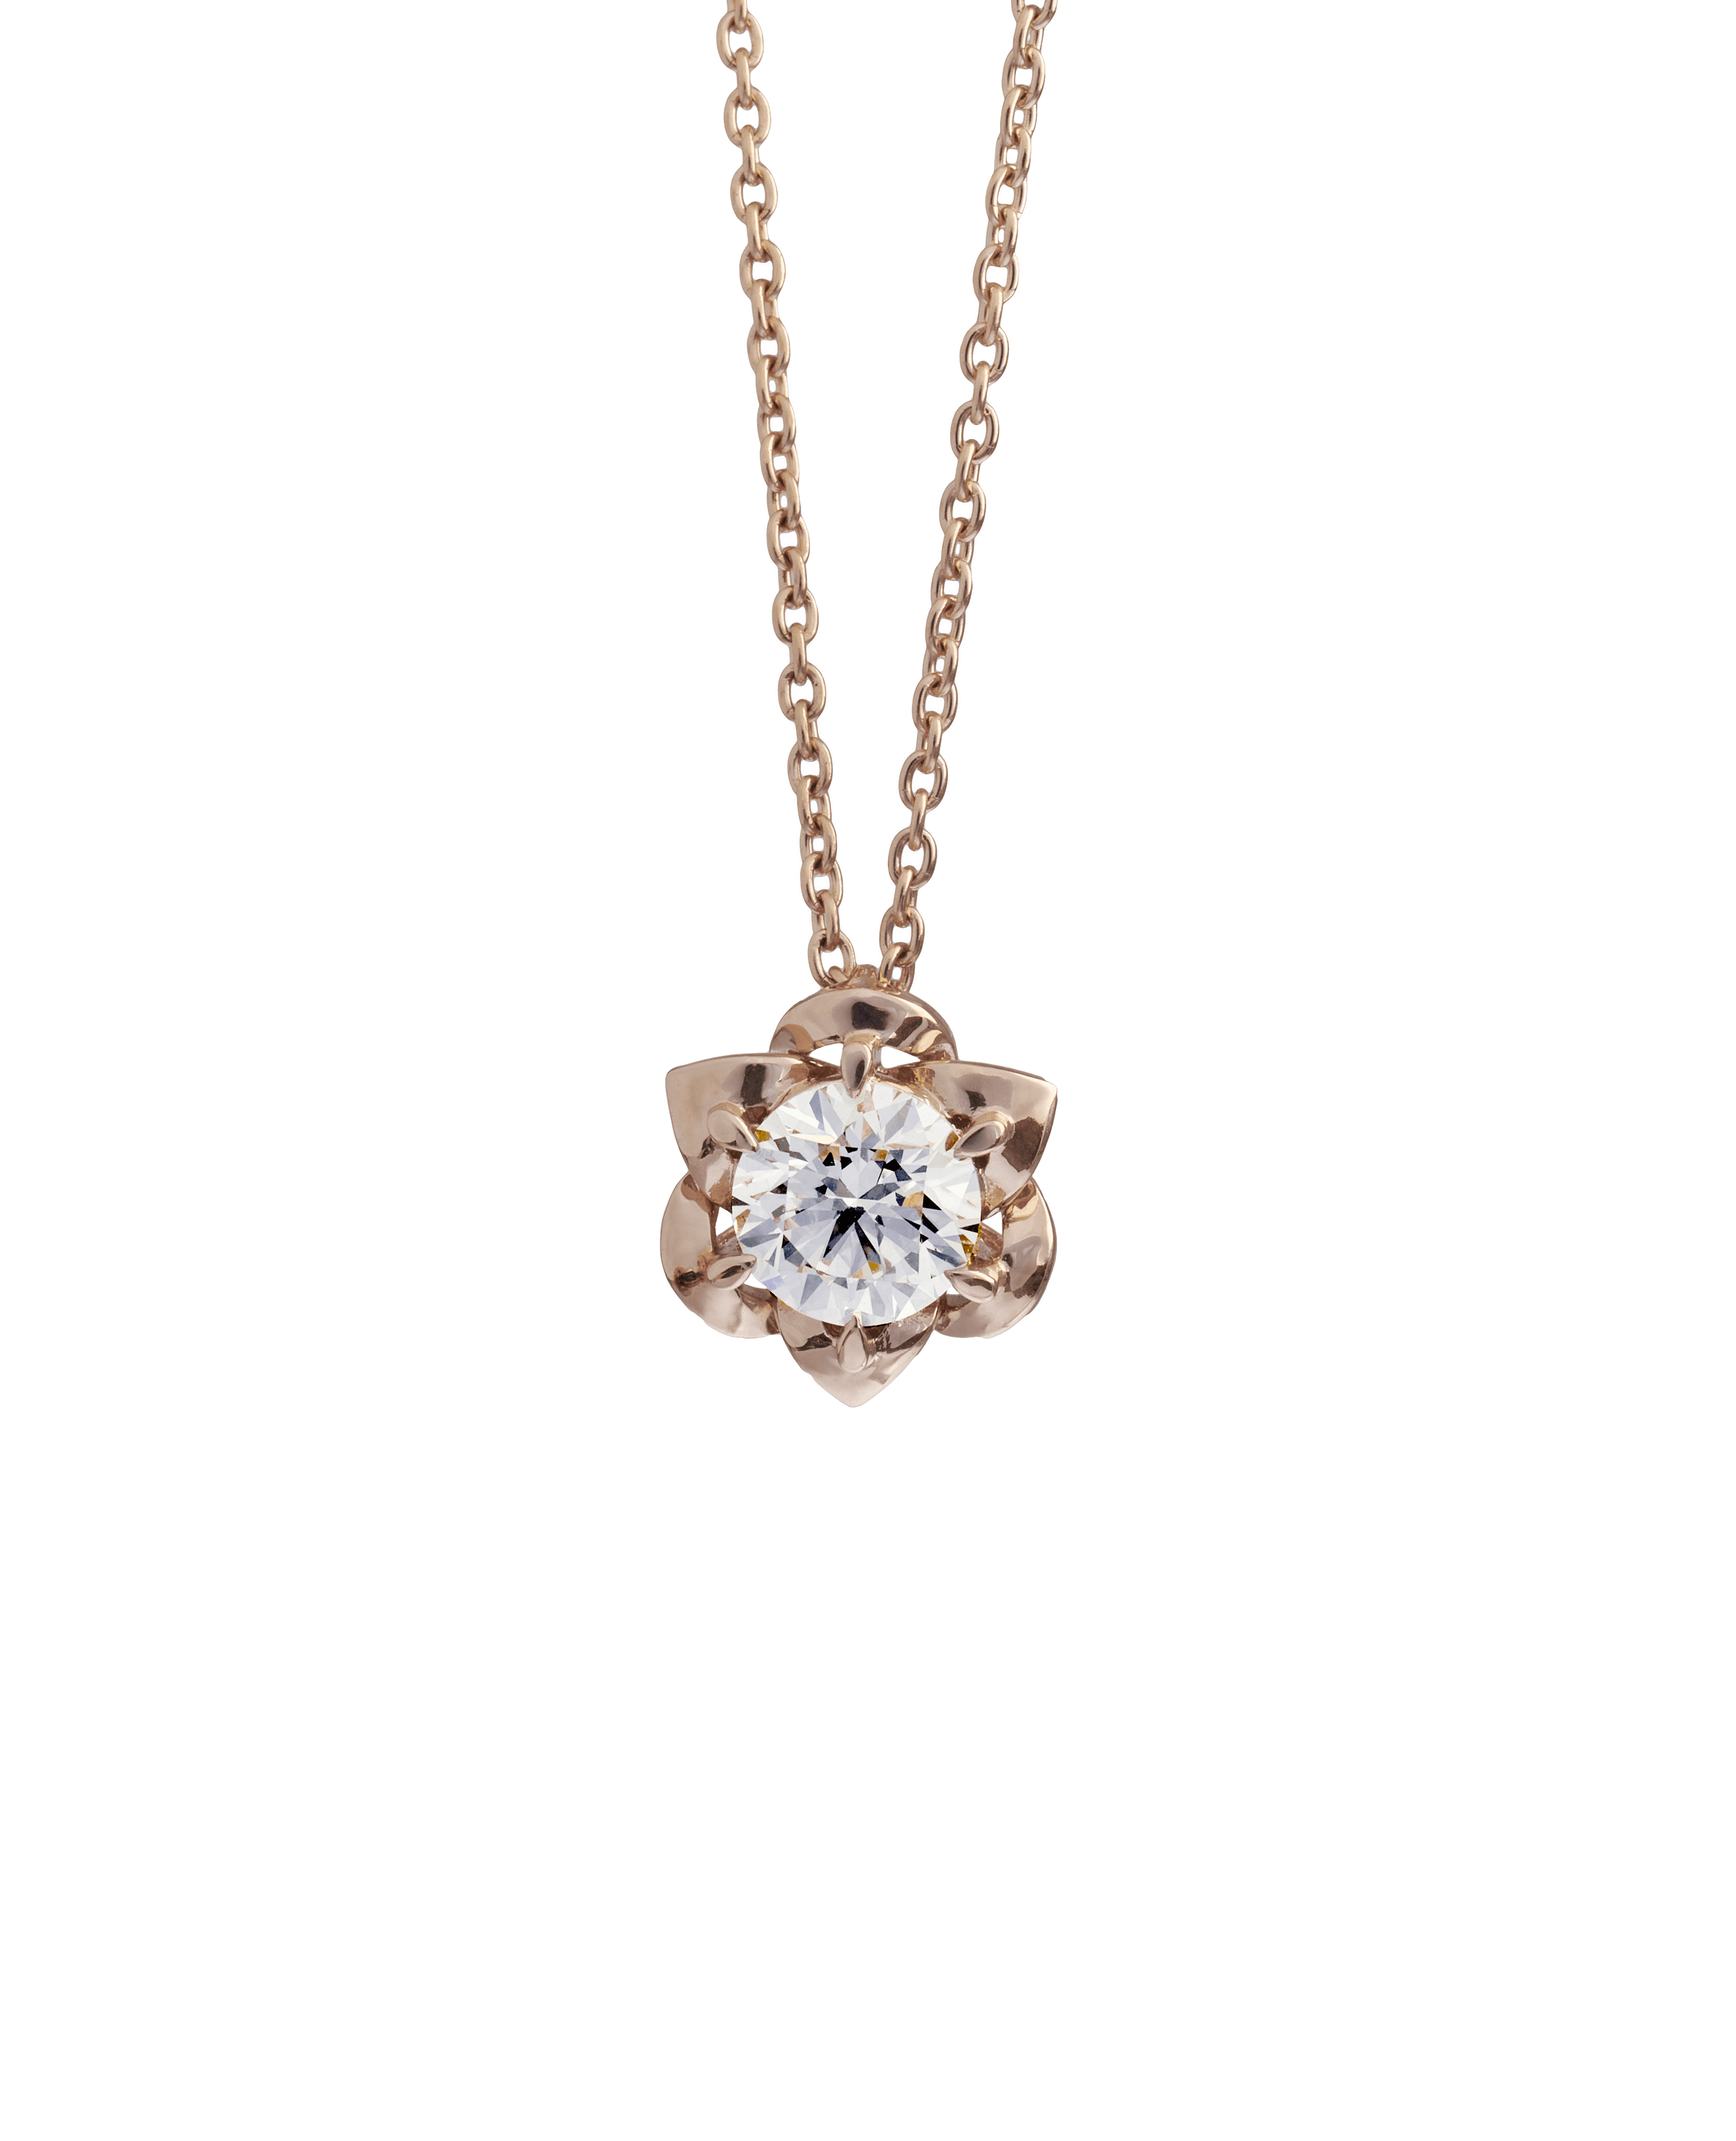 18K Rose Gold Diamond Solitaire Pendant Necklace | 18K rose gold / 0.3 ct  | Jewelry | The Future Rocks